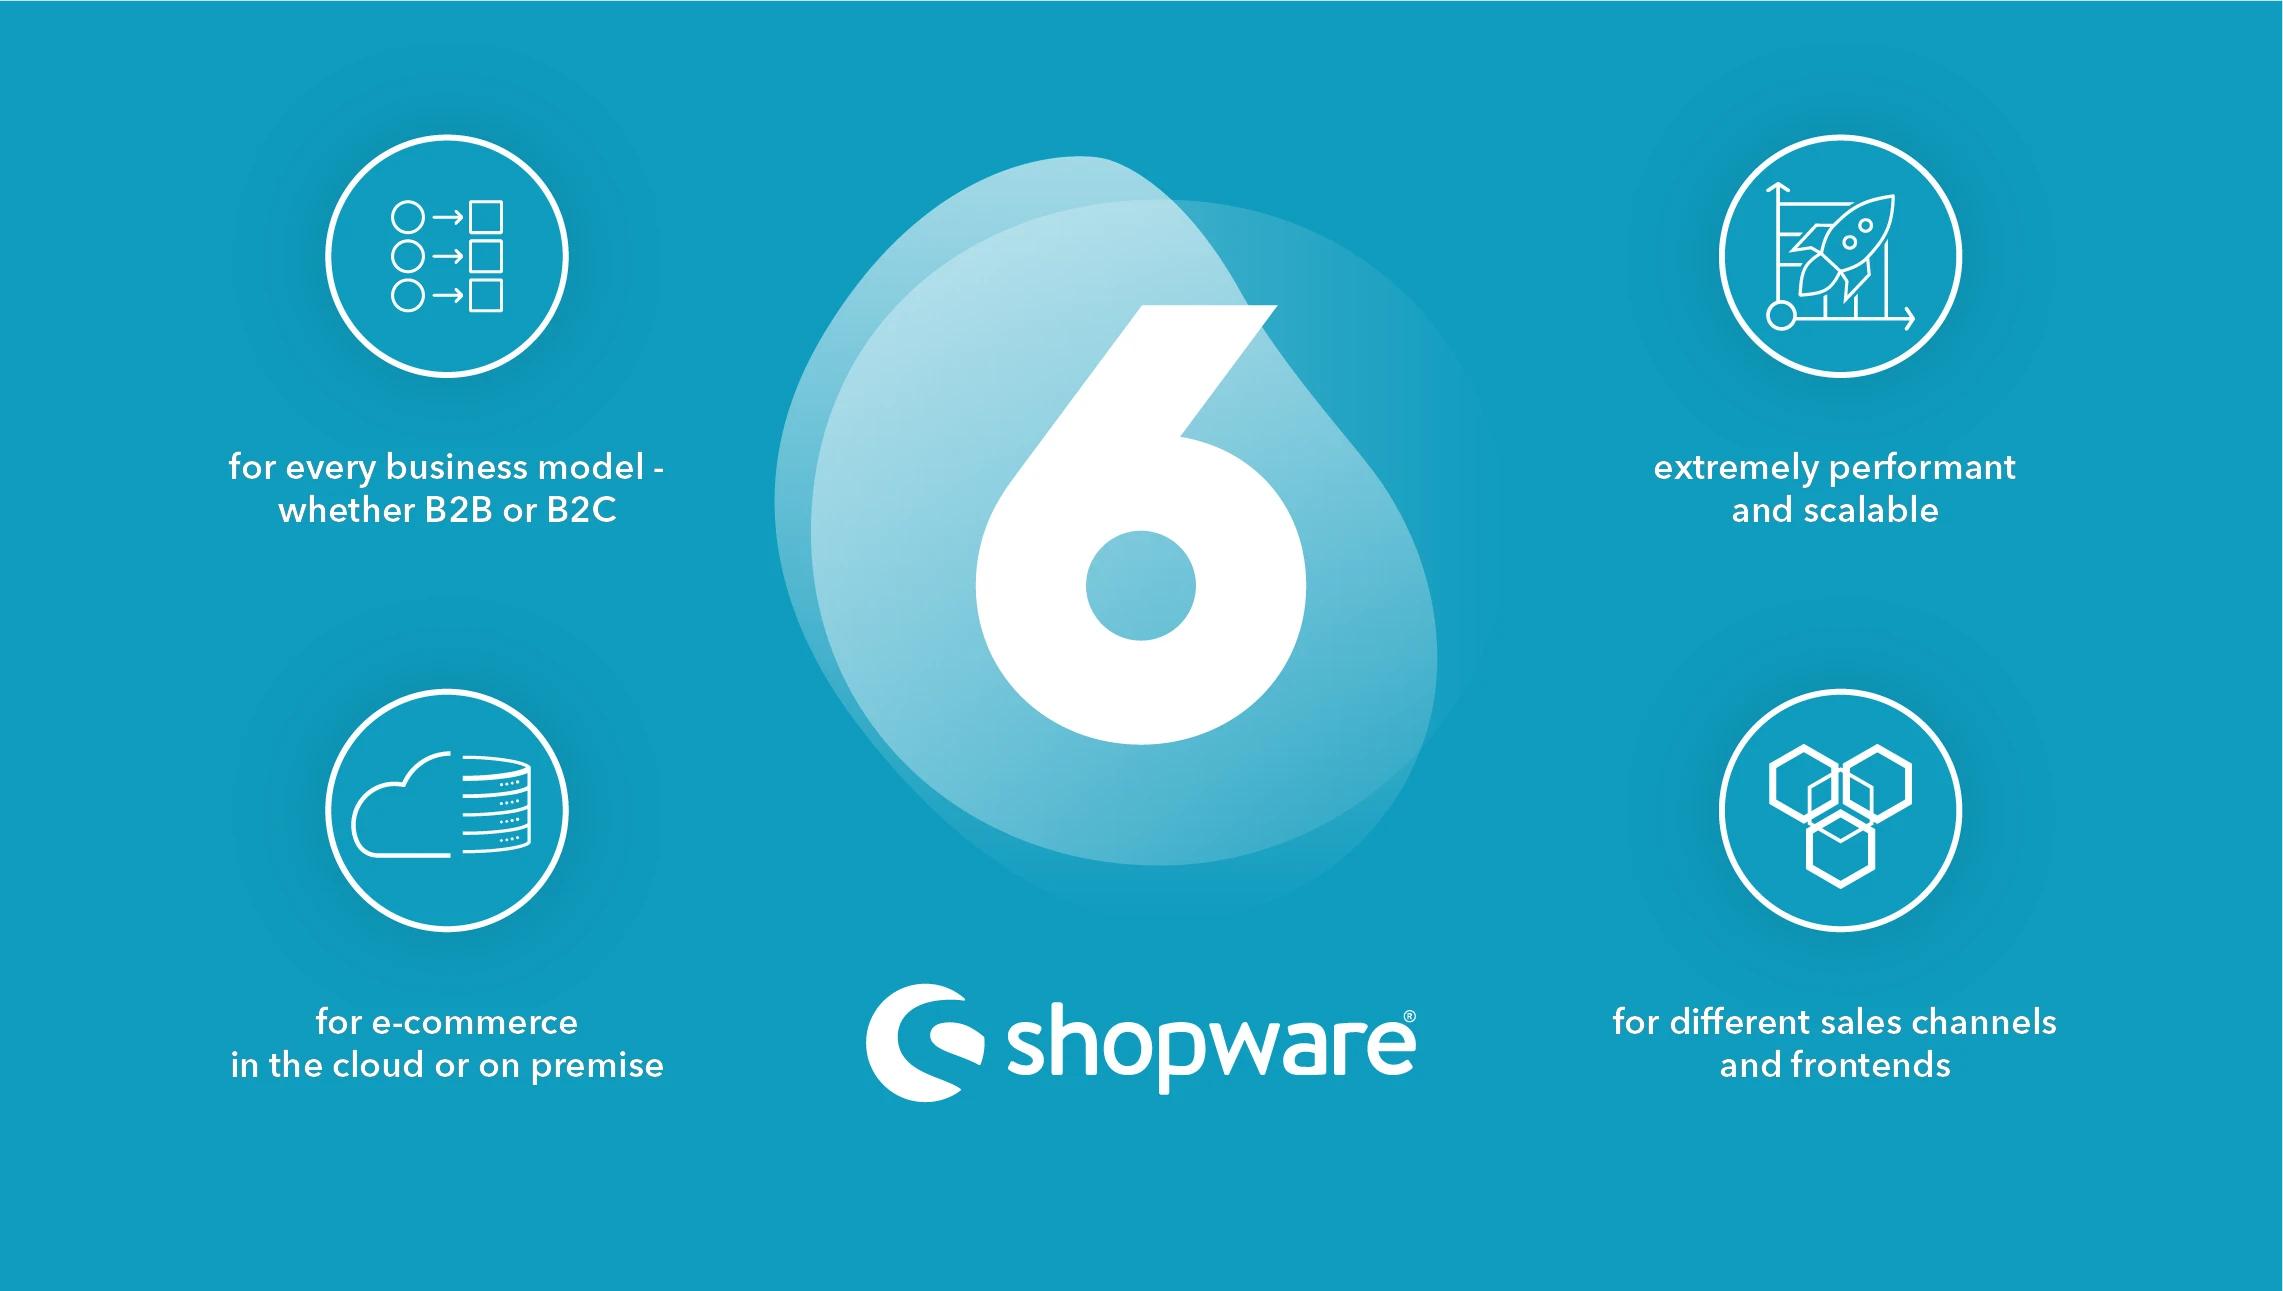 Shopware combines technology and design - the intuitive shop system